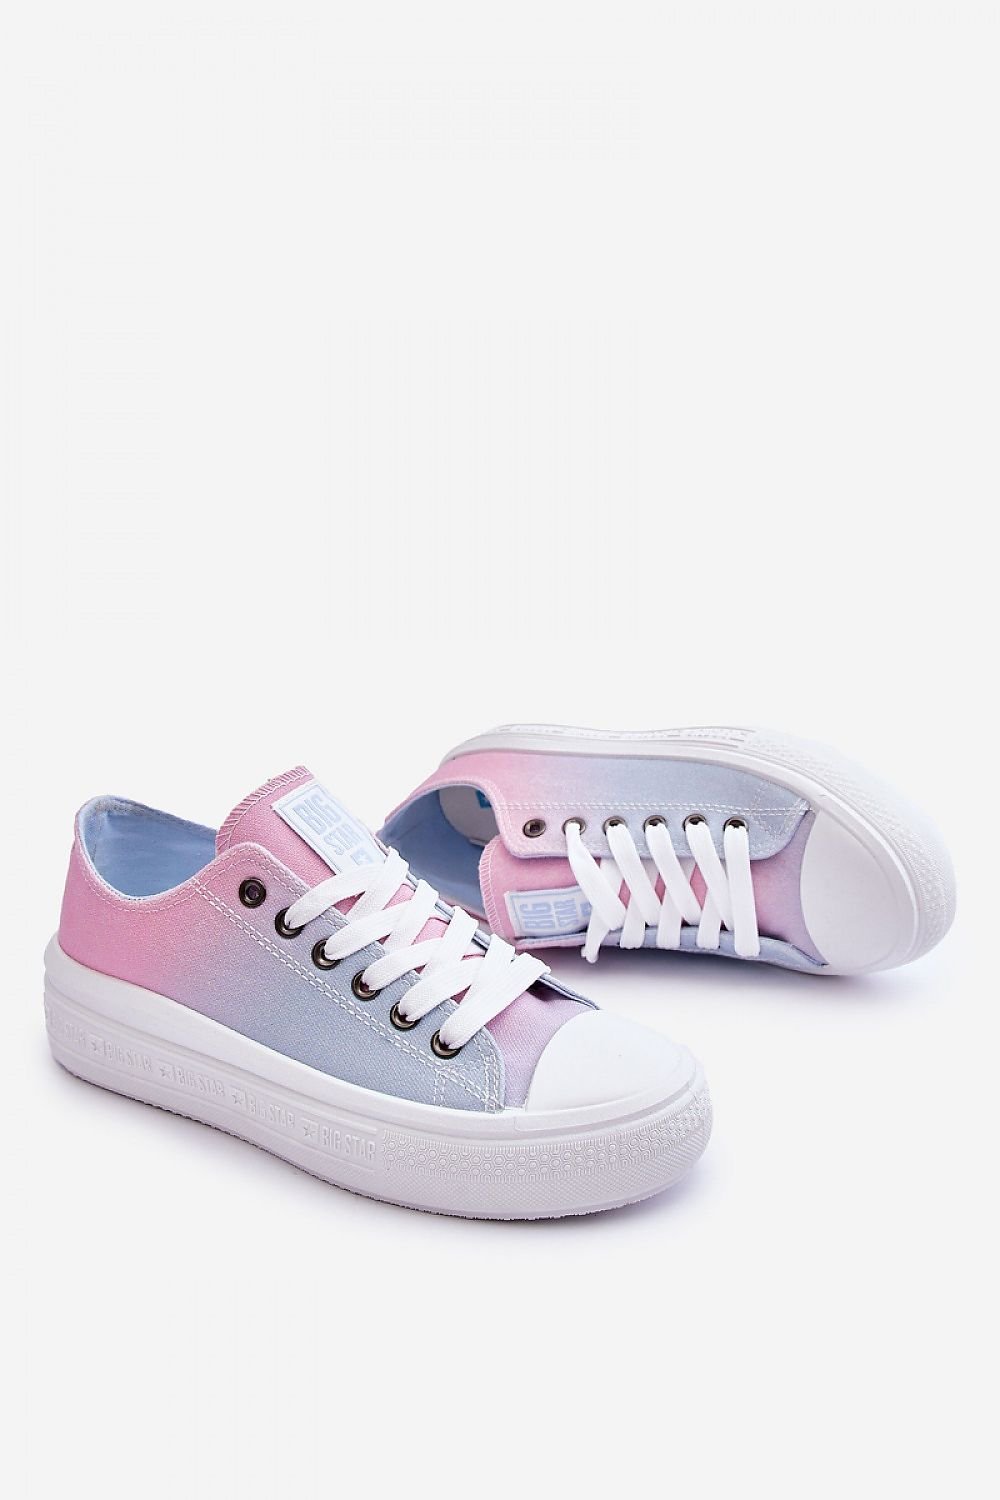 Classic Pink Gradient Step in Style Sneakers